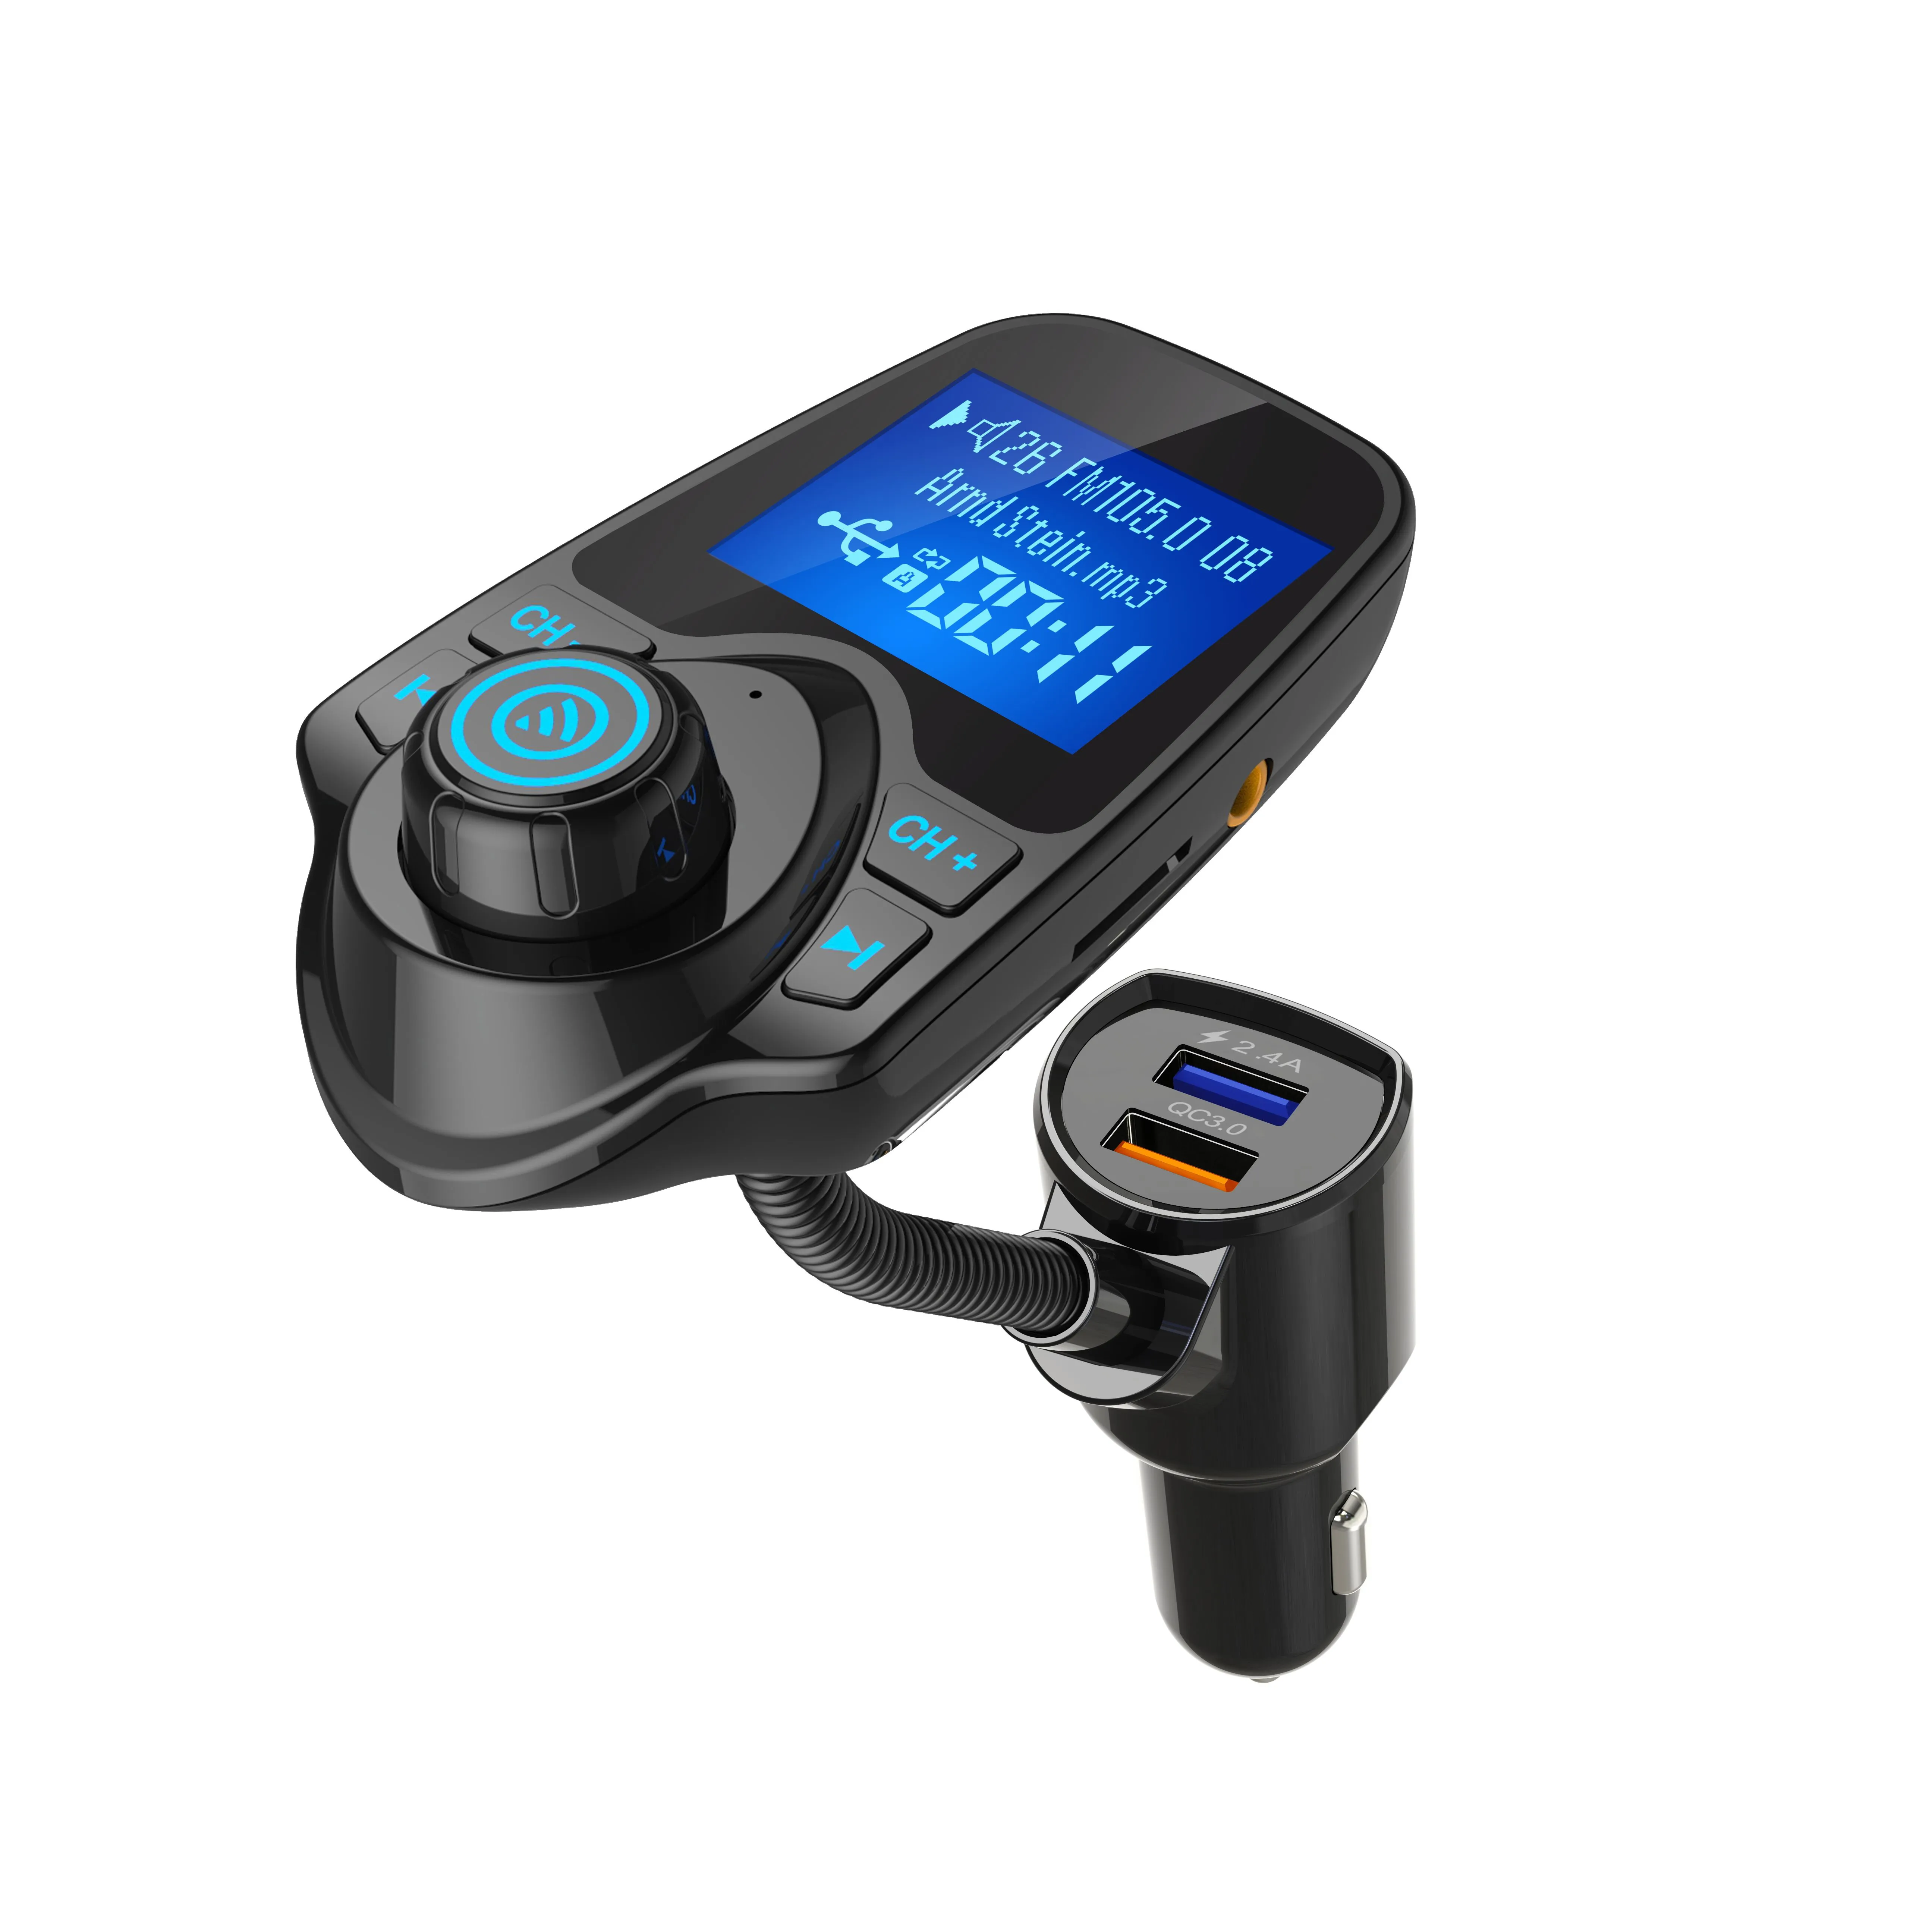 AGETUNR T10Q V4.2 Car MP3 Player Bluetooth FM transmitter Handsfree Stereo QC3.0 Charger 1.44 inch LCD display with AUX output